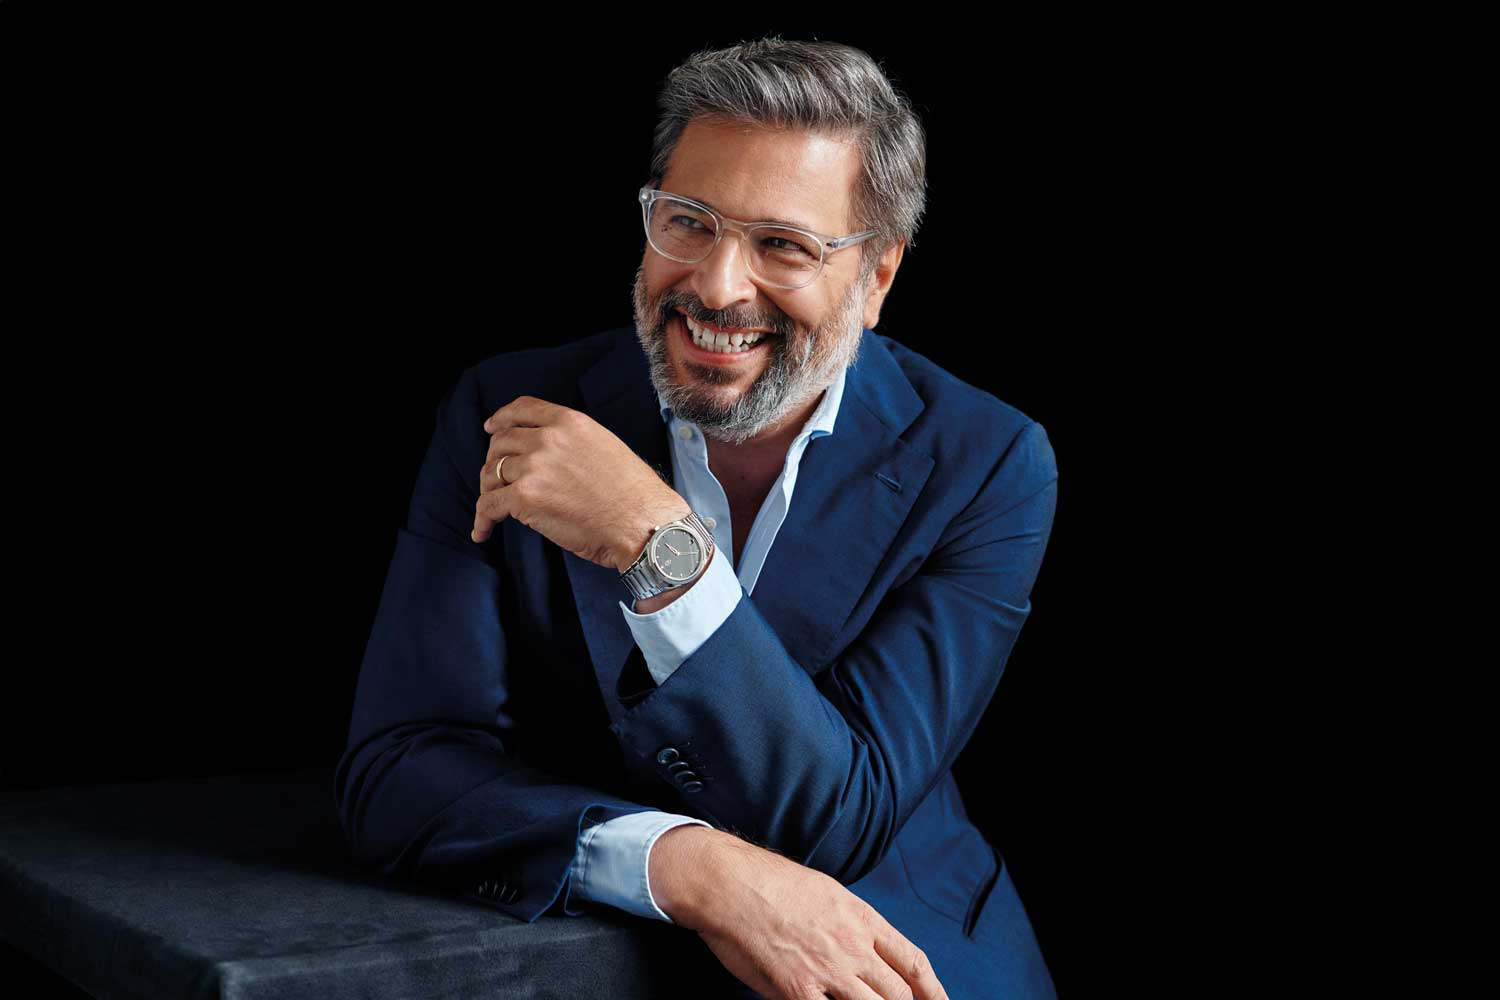 Guido Terreni took on the role as CEO at Parmigiani in early 2021